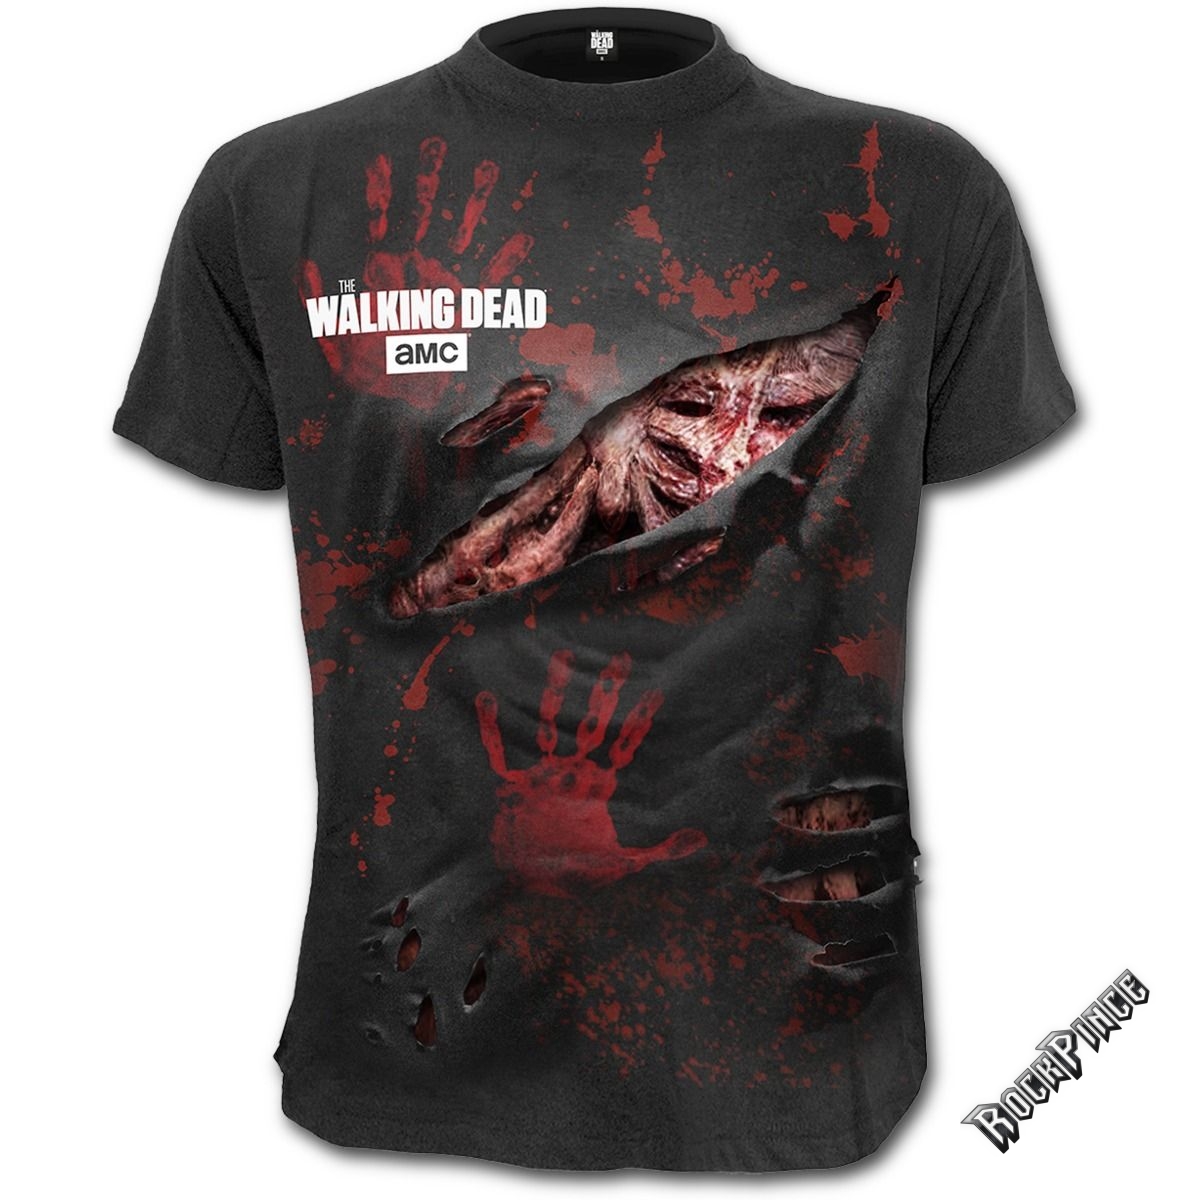 The Walking Dead - MICHONNE - ALL INFECTED - Ripped T-Shirt Black (Plain) - G003M125